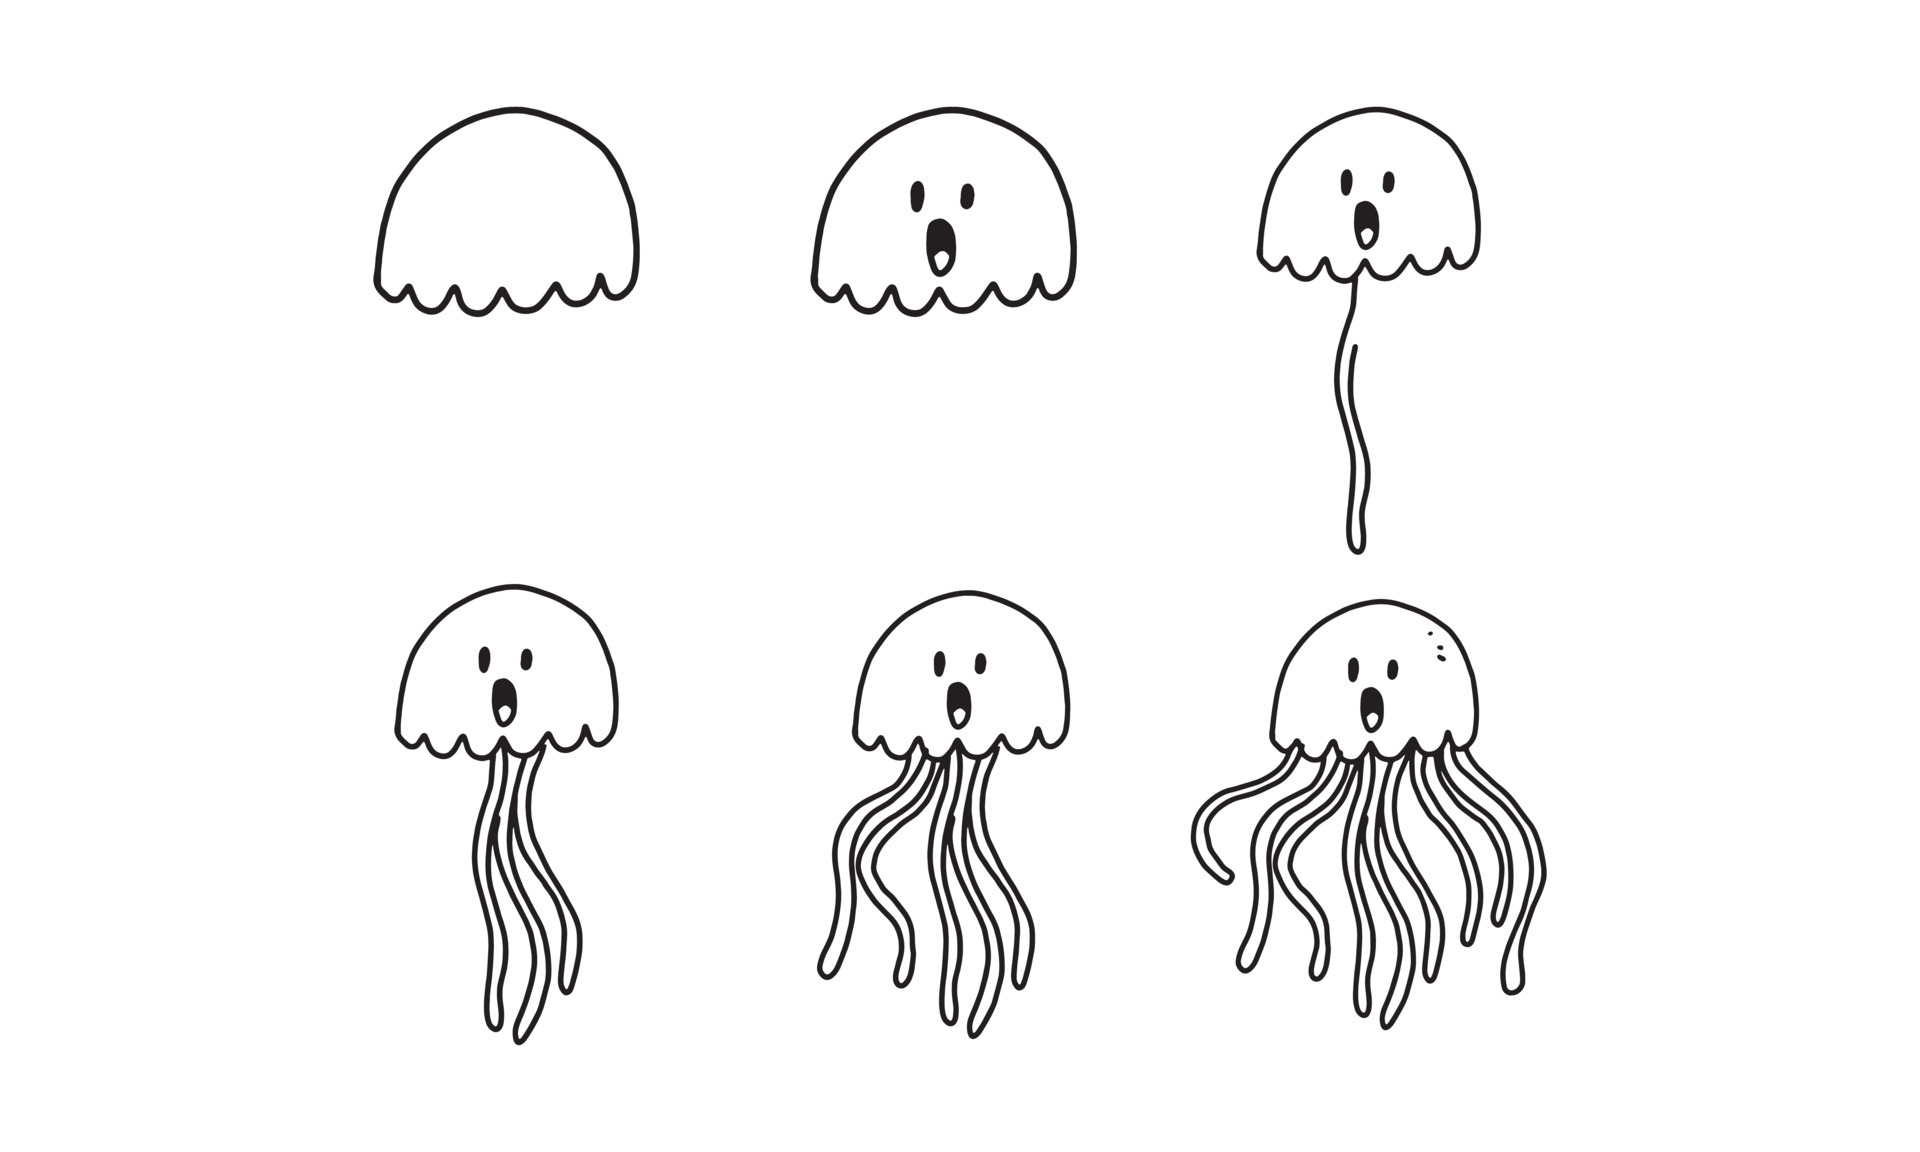 how to draw a cute jellyfish step by step. sea animal cartoon coloring  character collection for kids. easy funny animal drawing illustration for  kids creativity. drawing guide book in vector design. 4677700